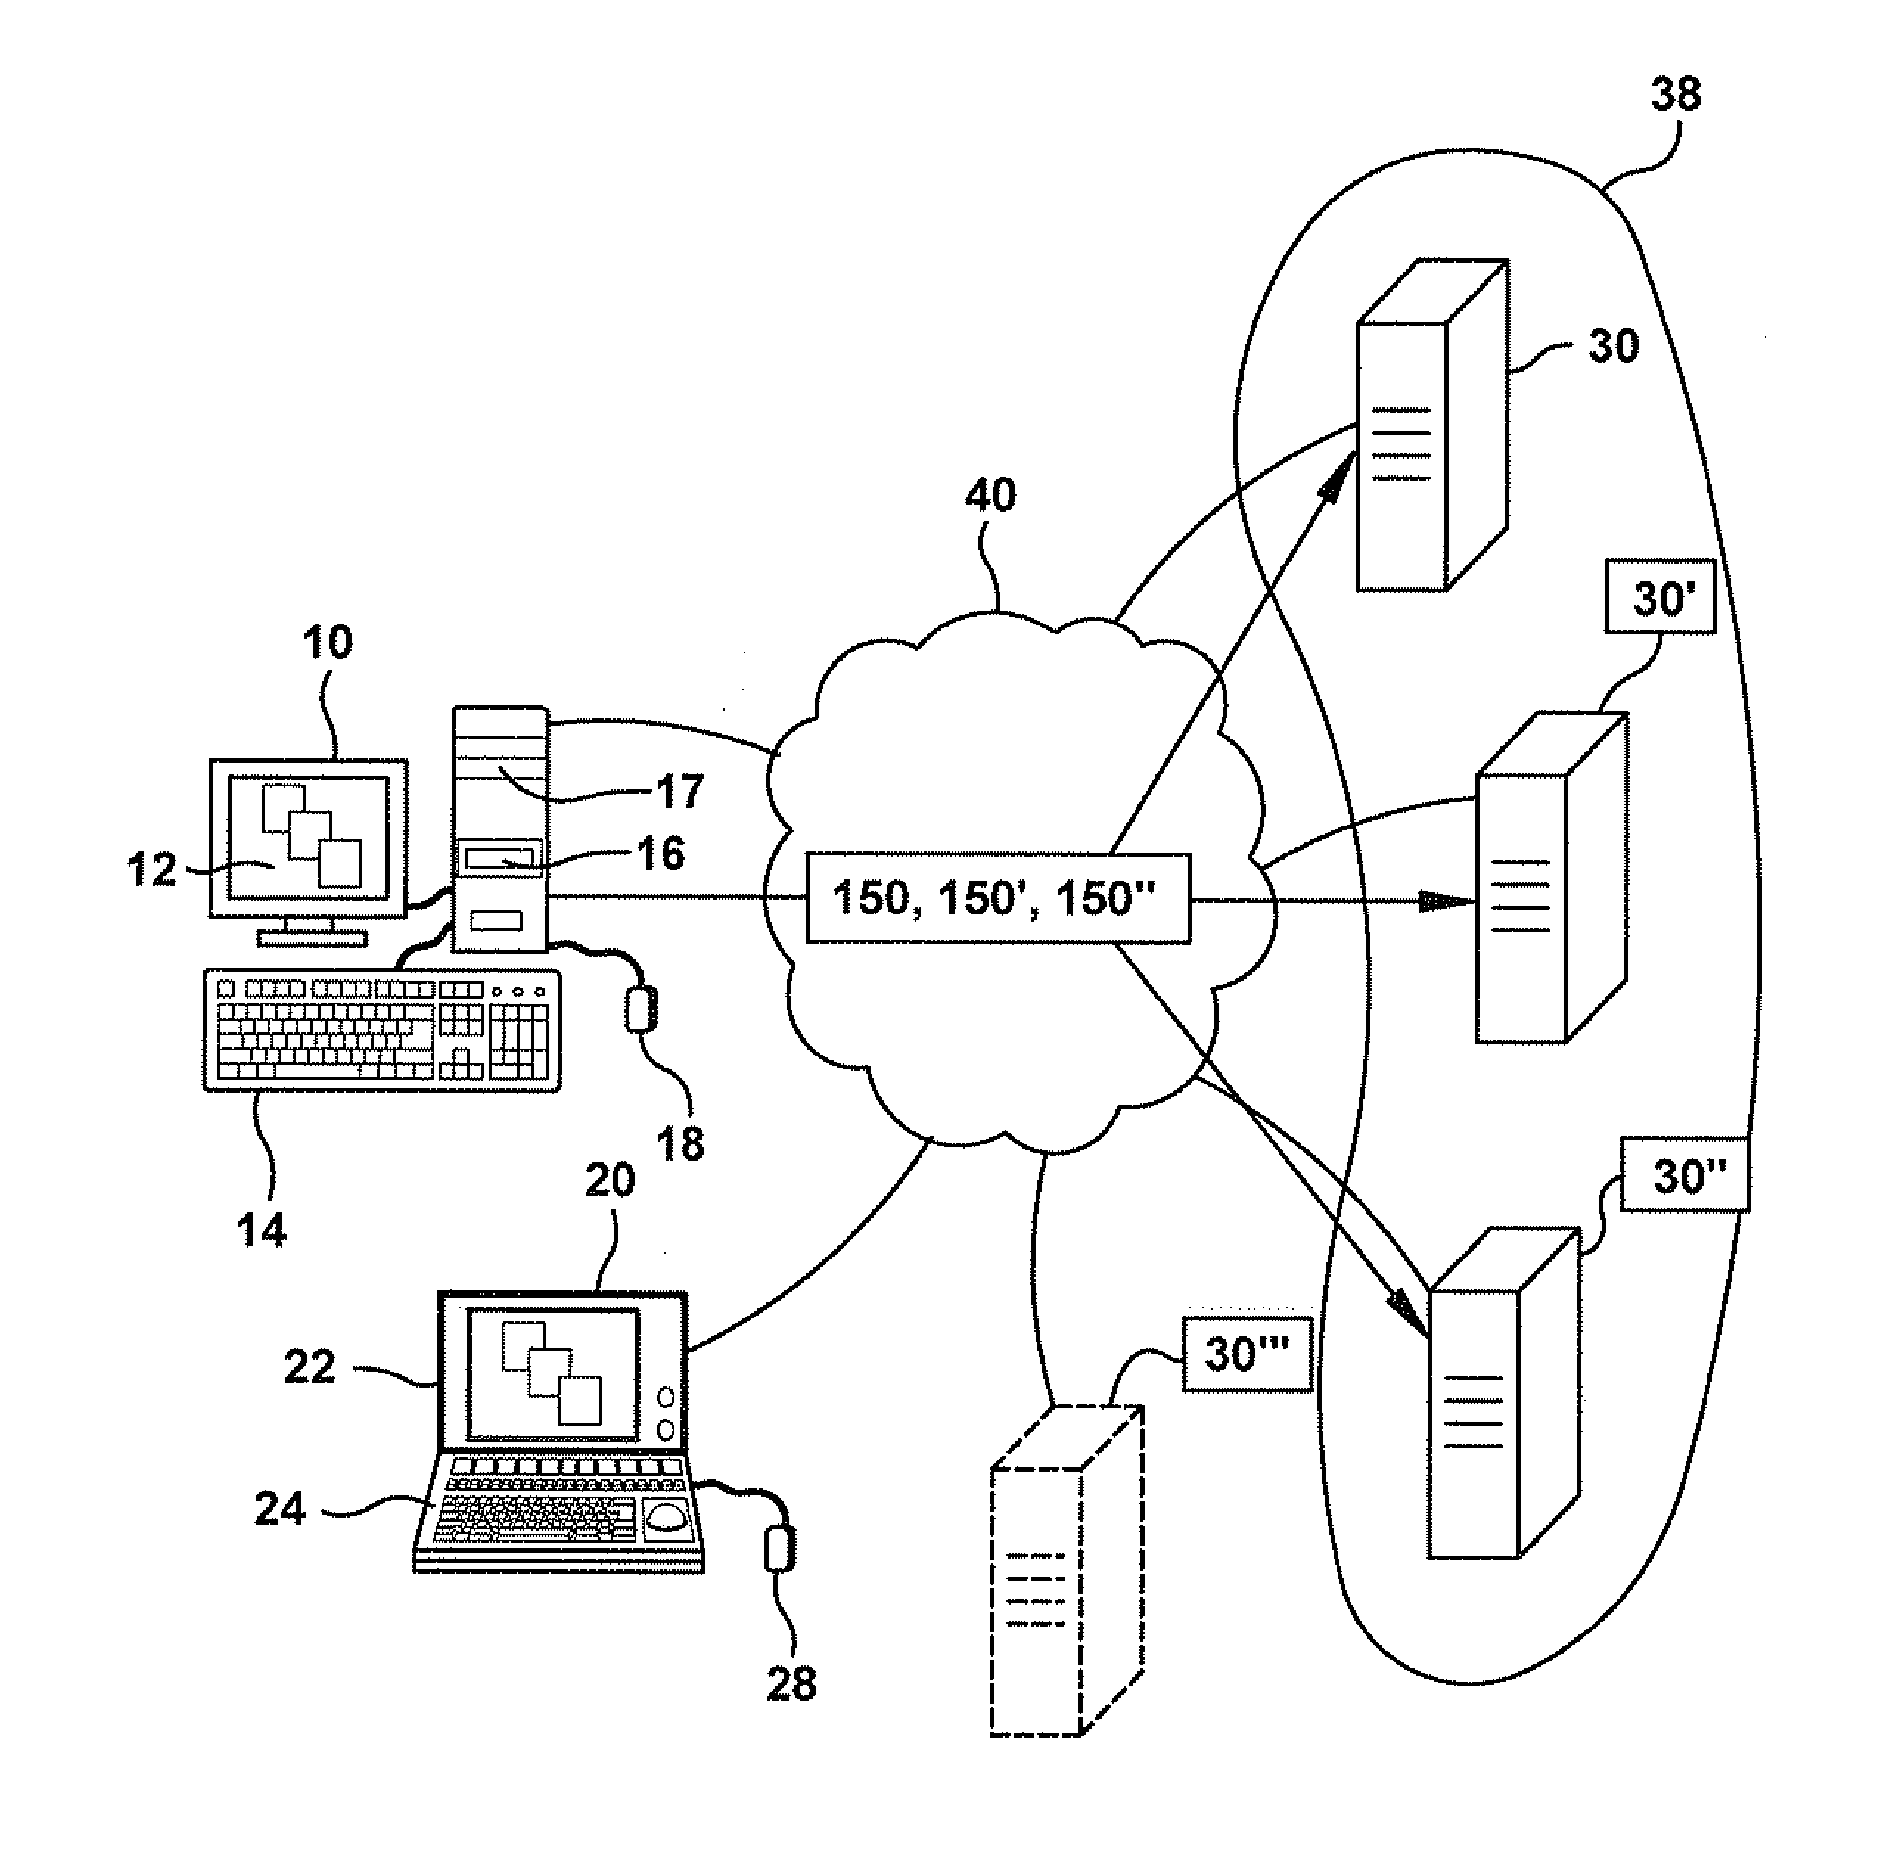 Methods and systems for assigning access control levels in providing access to resources via virtual machines